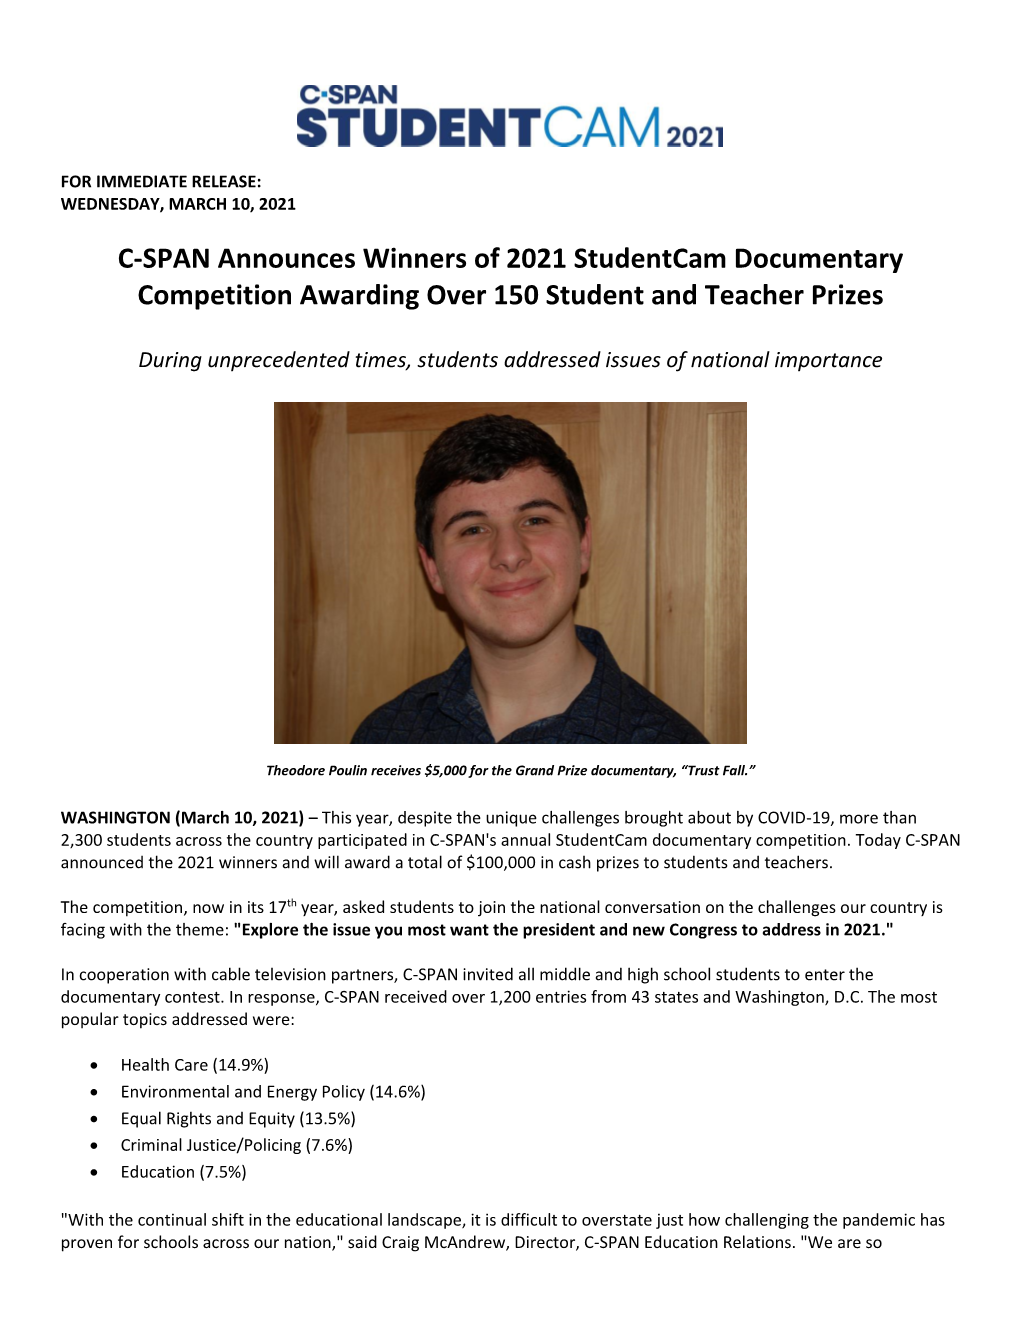 C-SPAN Announces Winners of 2021 Studentcam Documentary Competition Awarding Over 150 Student and Teacher Prizes